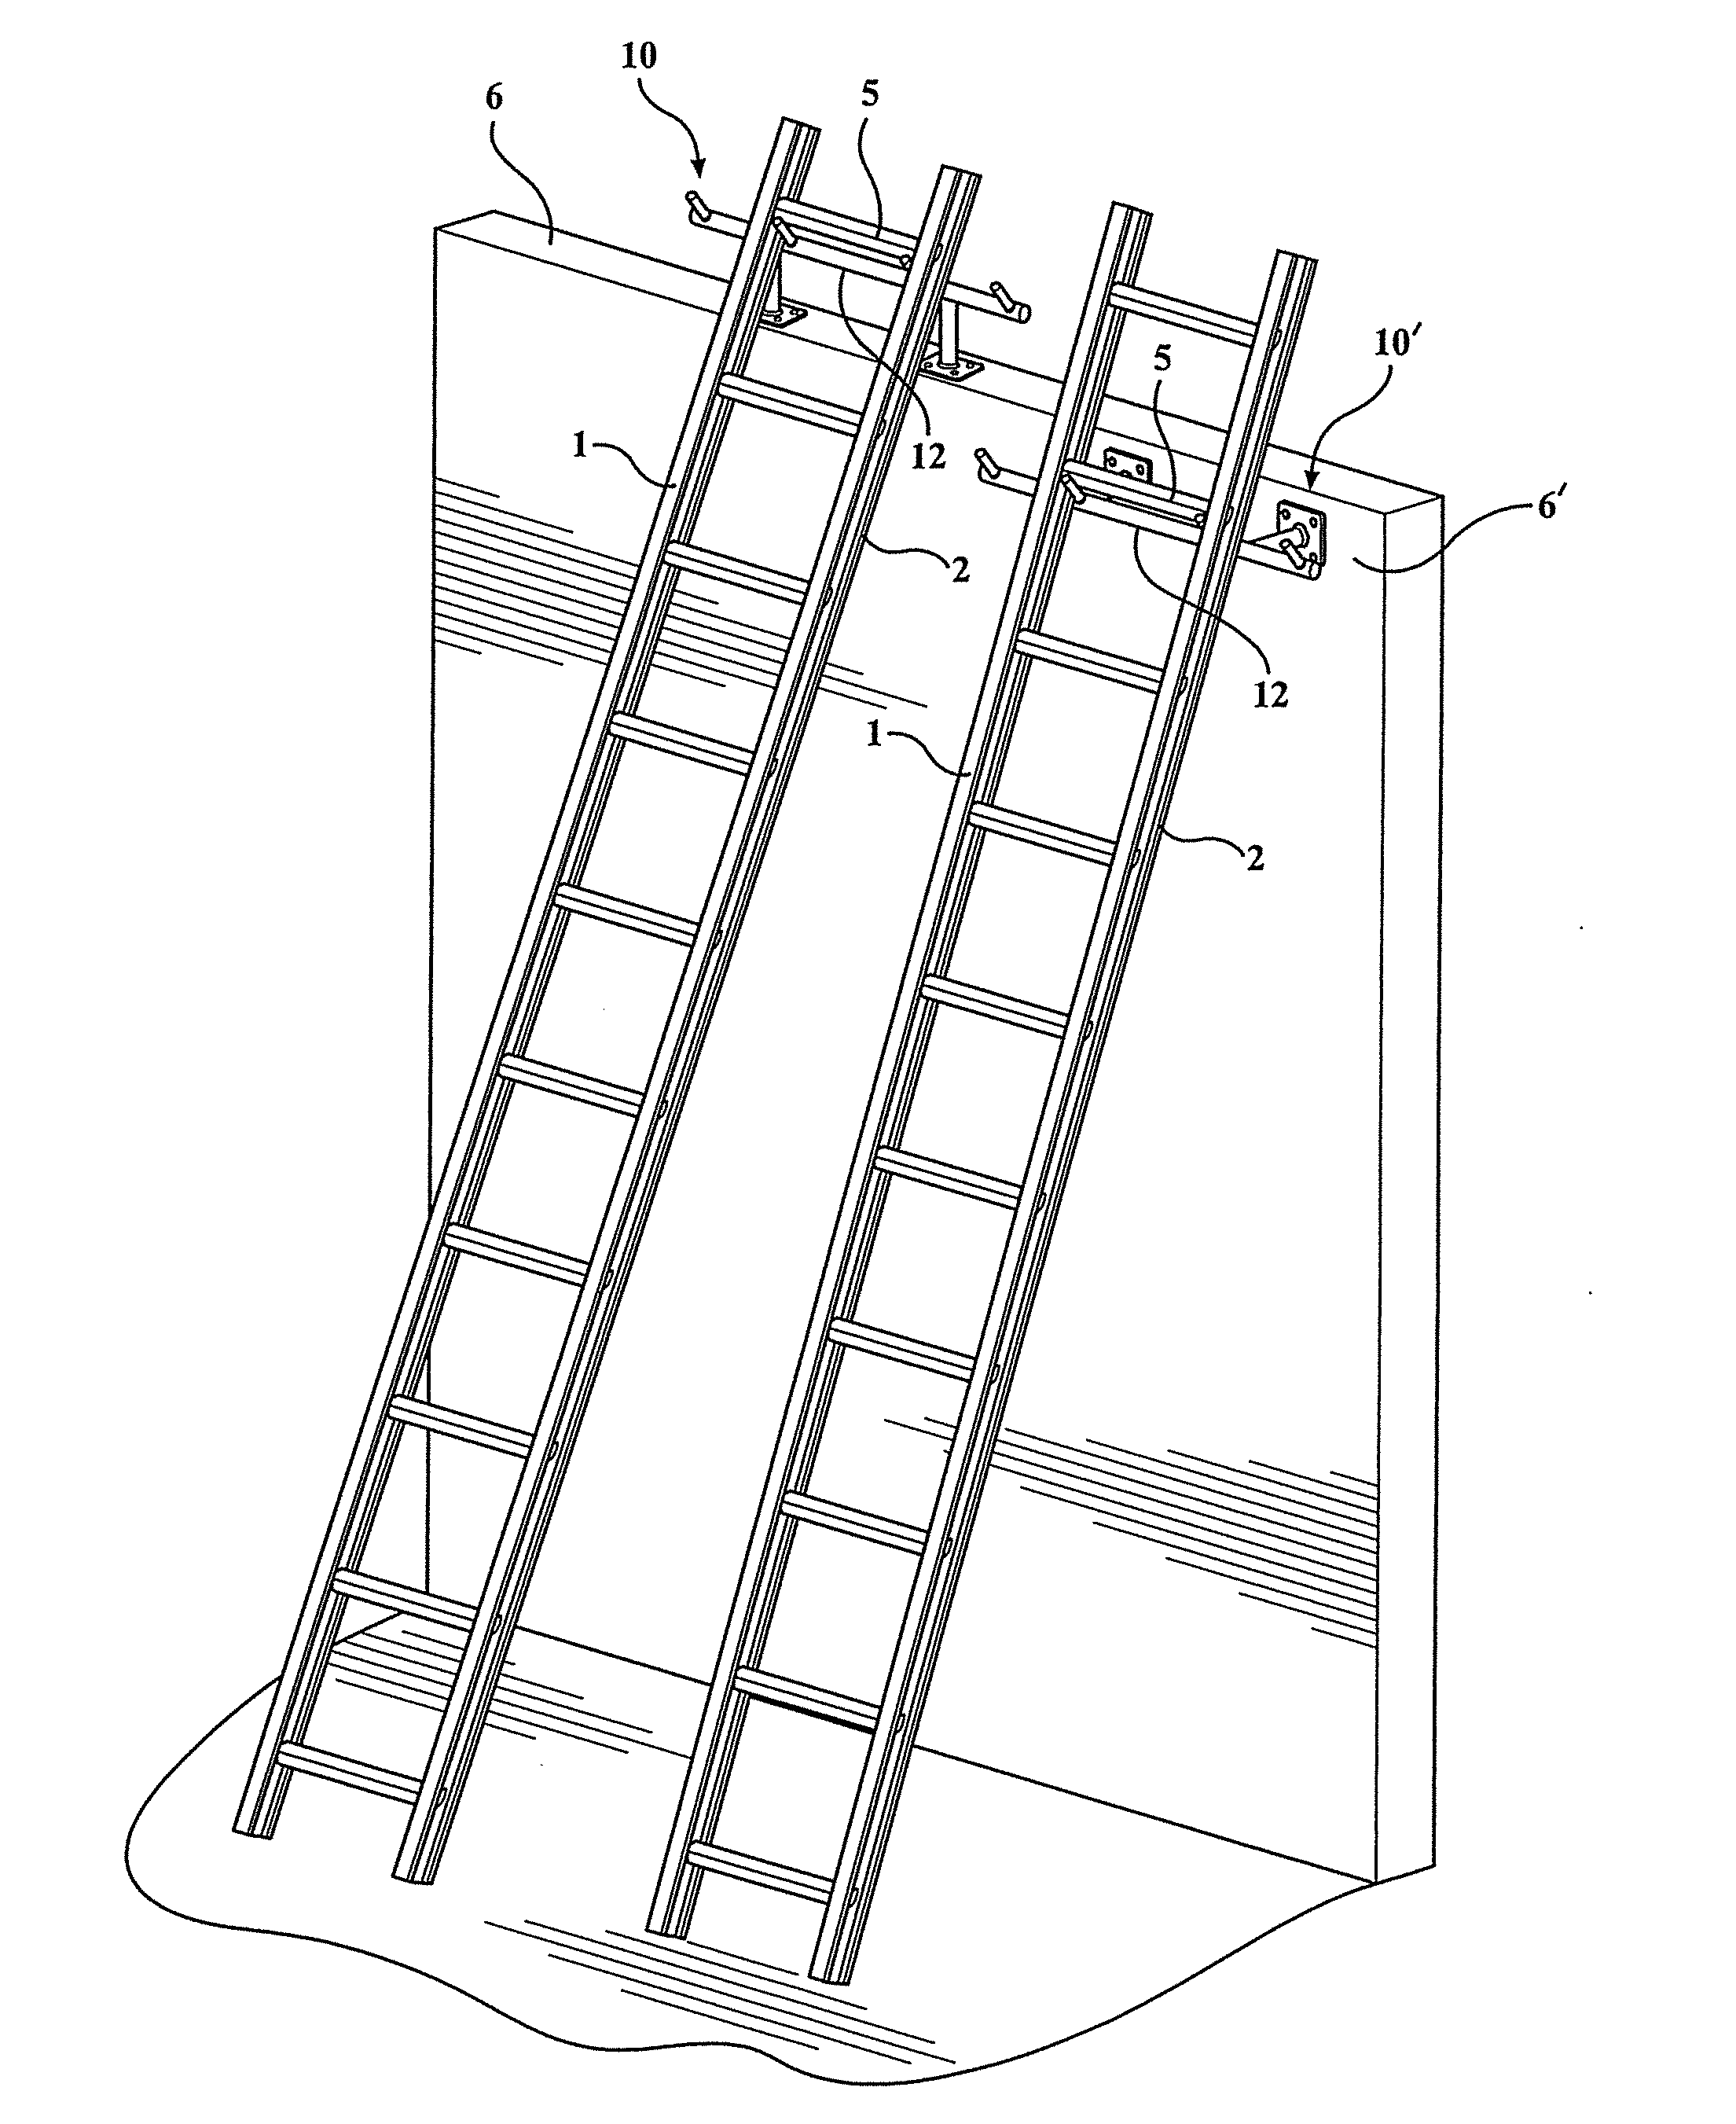 Ladder rest and restraining device